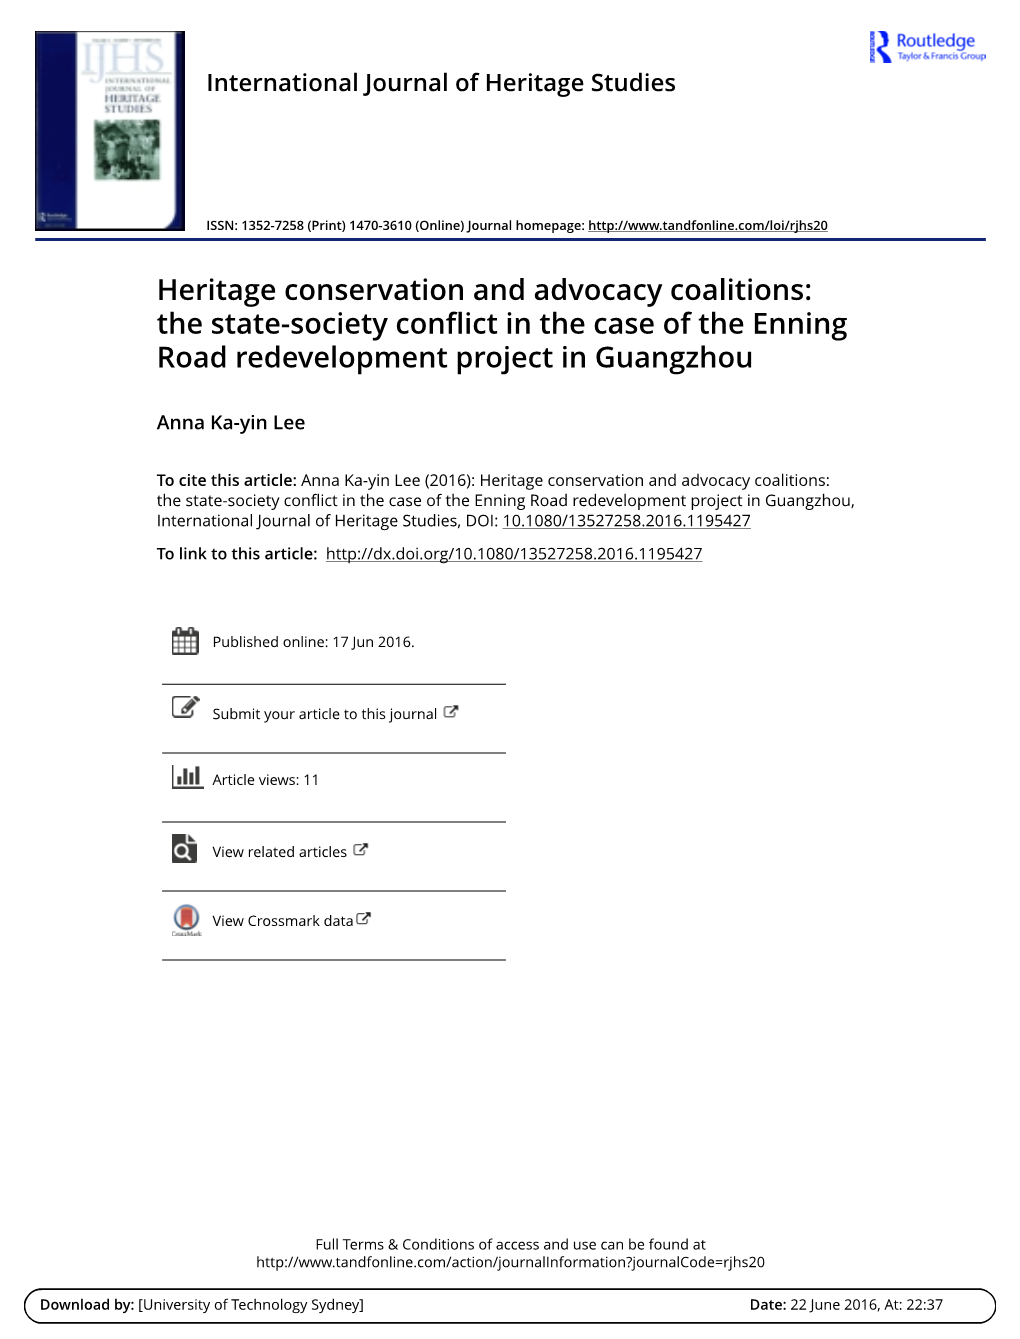 Heritage Conservation and Advocacy Coalitions: the State-Society Conflict in the Case of the Enning Road Redevelopment Project in Guangzhou